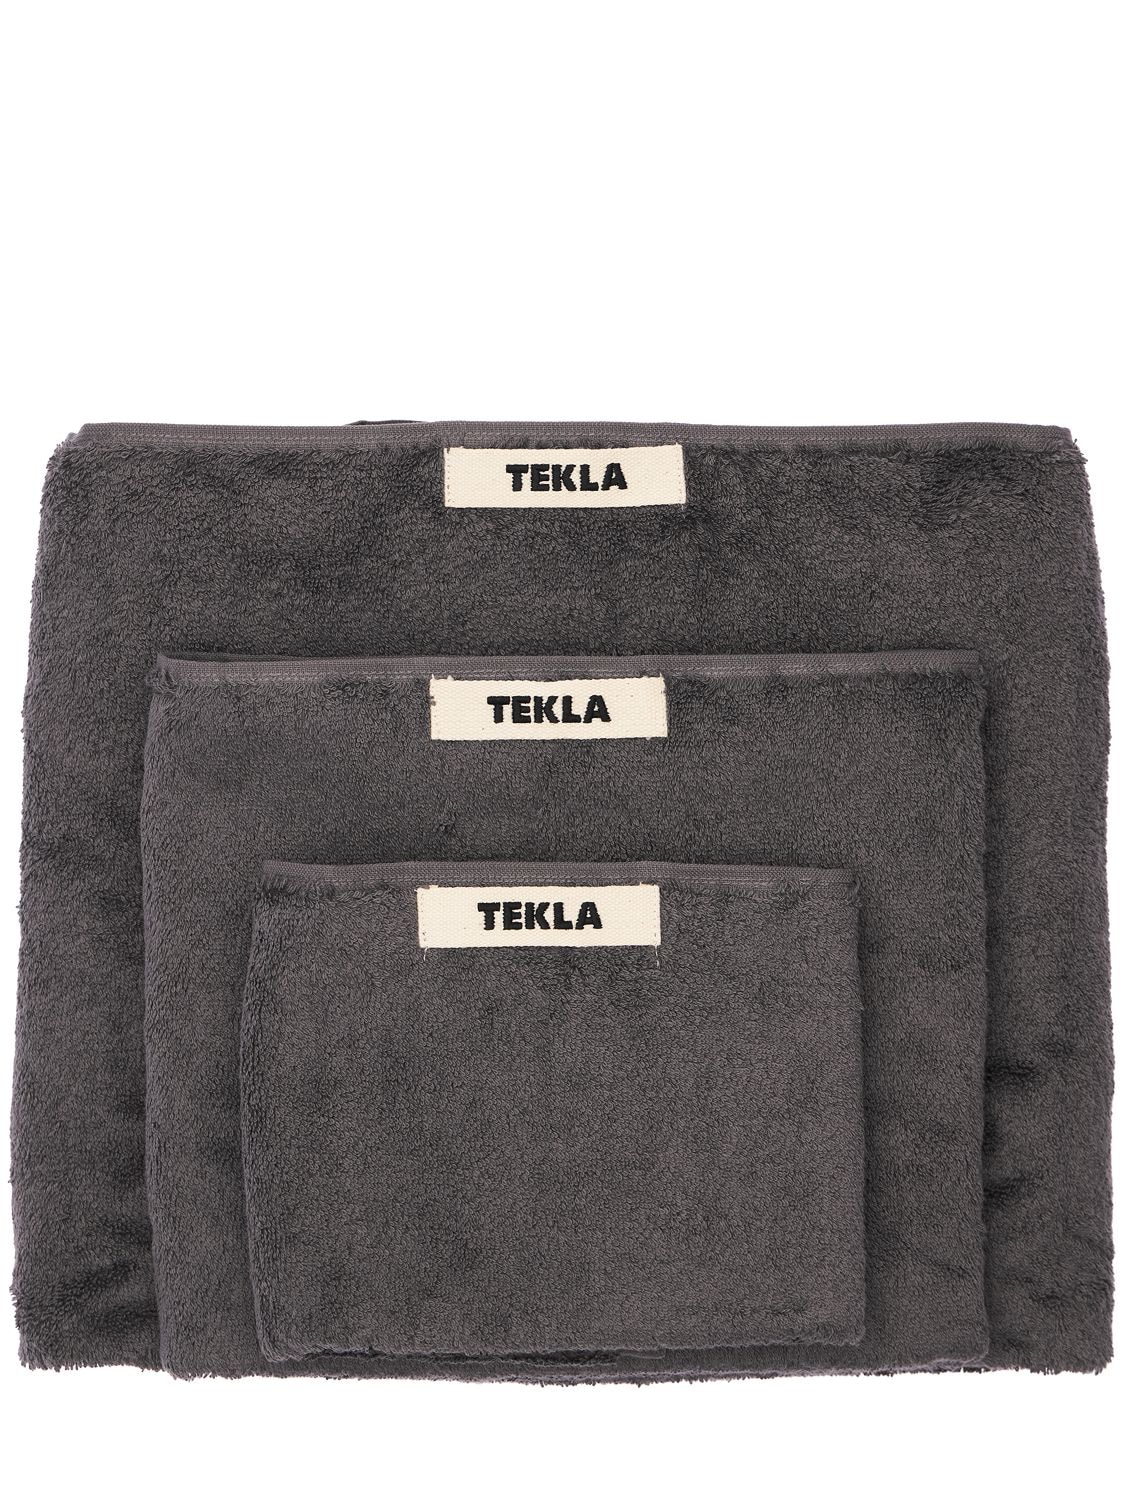 Tekla Set Of 3 Organic Cotton Towels In Charcoal